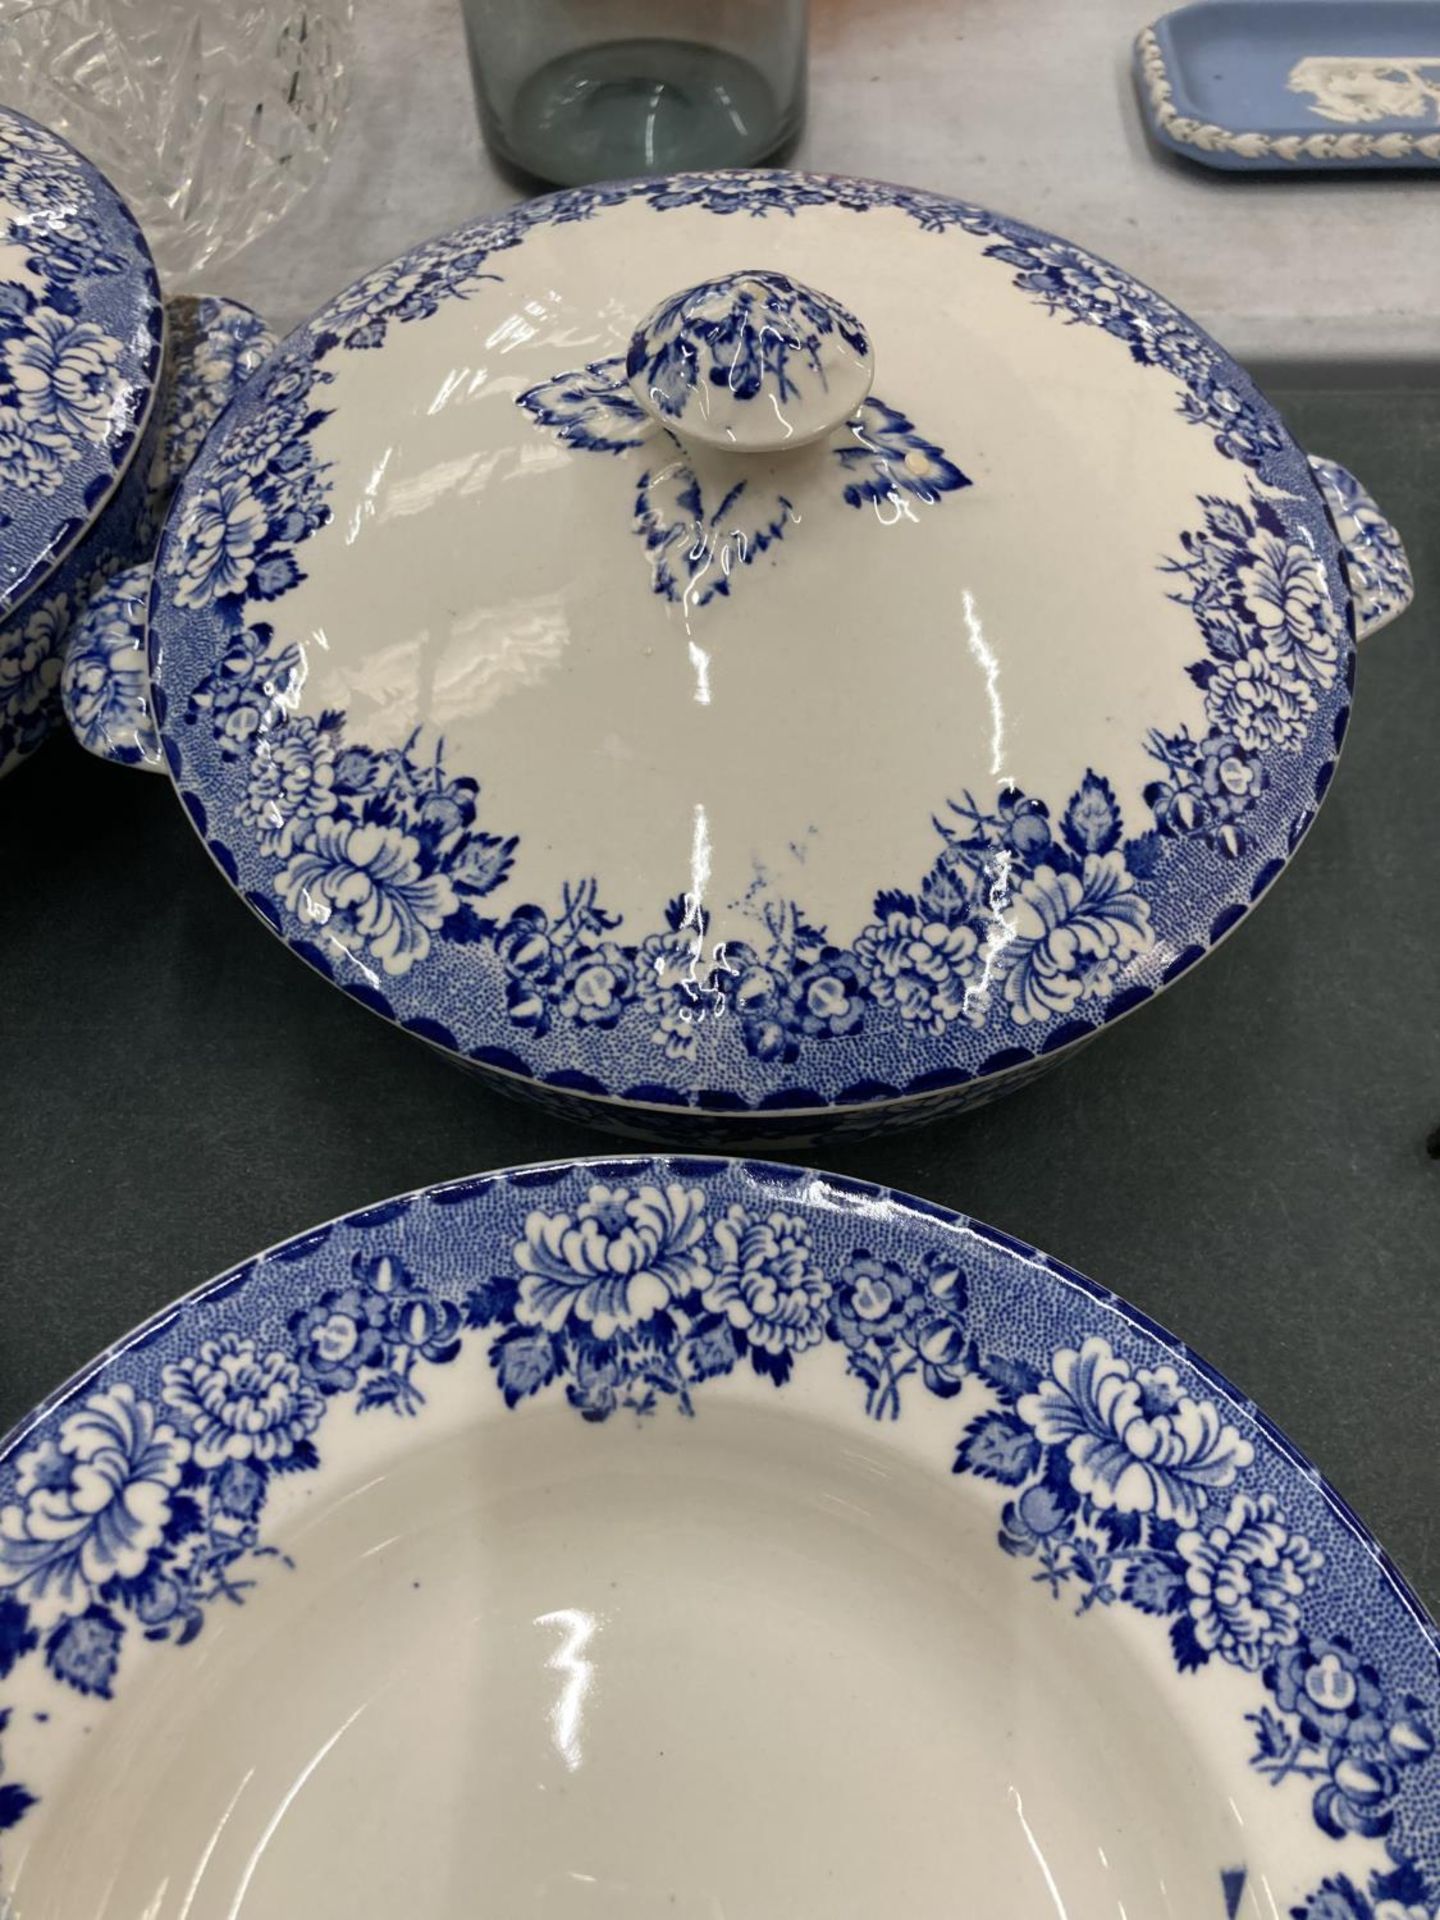 A QUANTITY OF BRITANNIA BLUE AND WHITE DINNER WARE TO INCLUDE PLATES, TUREENS, BOWLS, ETC - Image 2 of 4